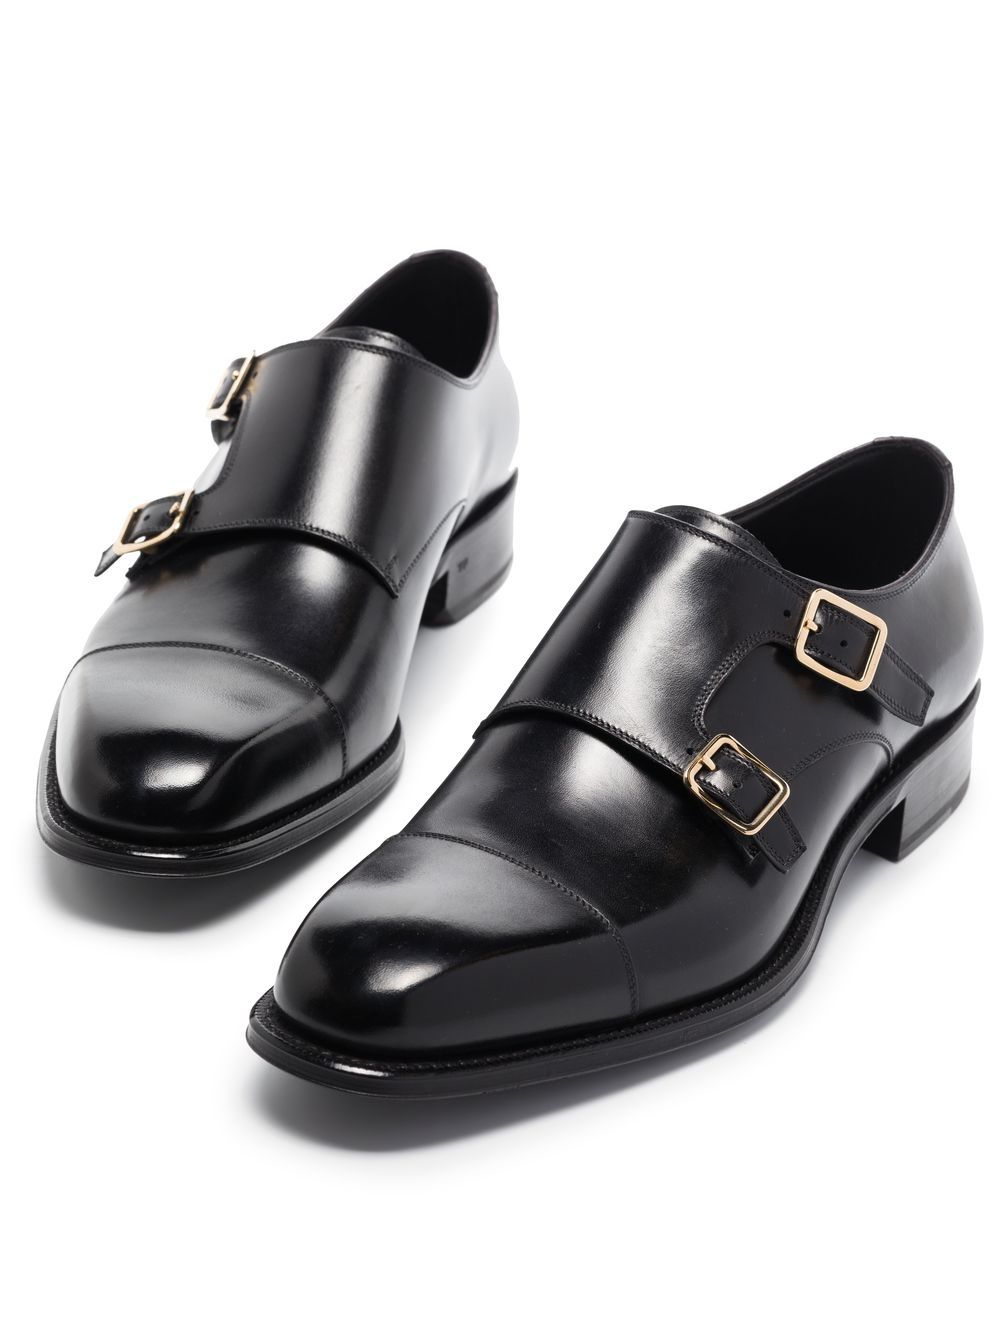 Total 46+ imagen tom ford monk shoes - Abzlocal.mx